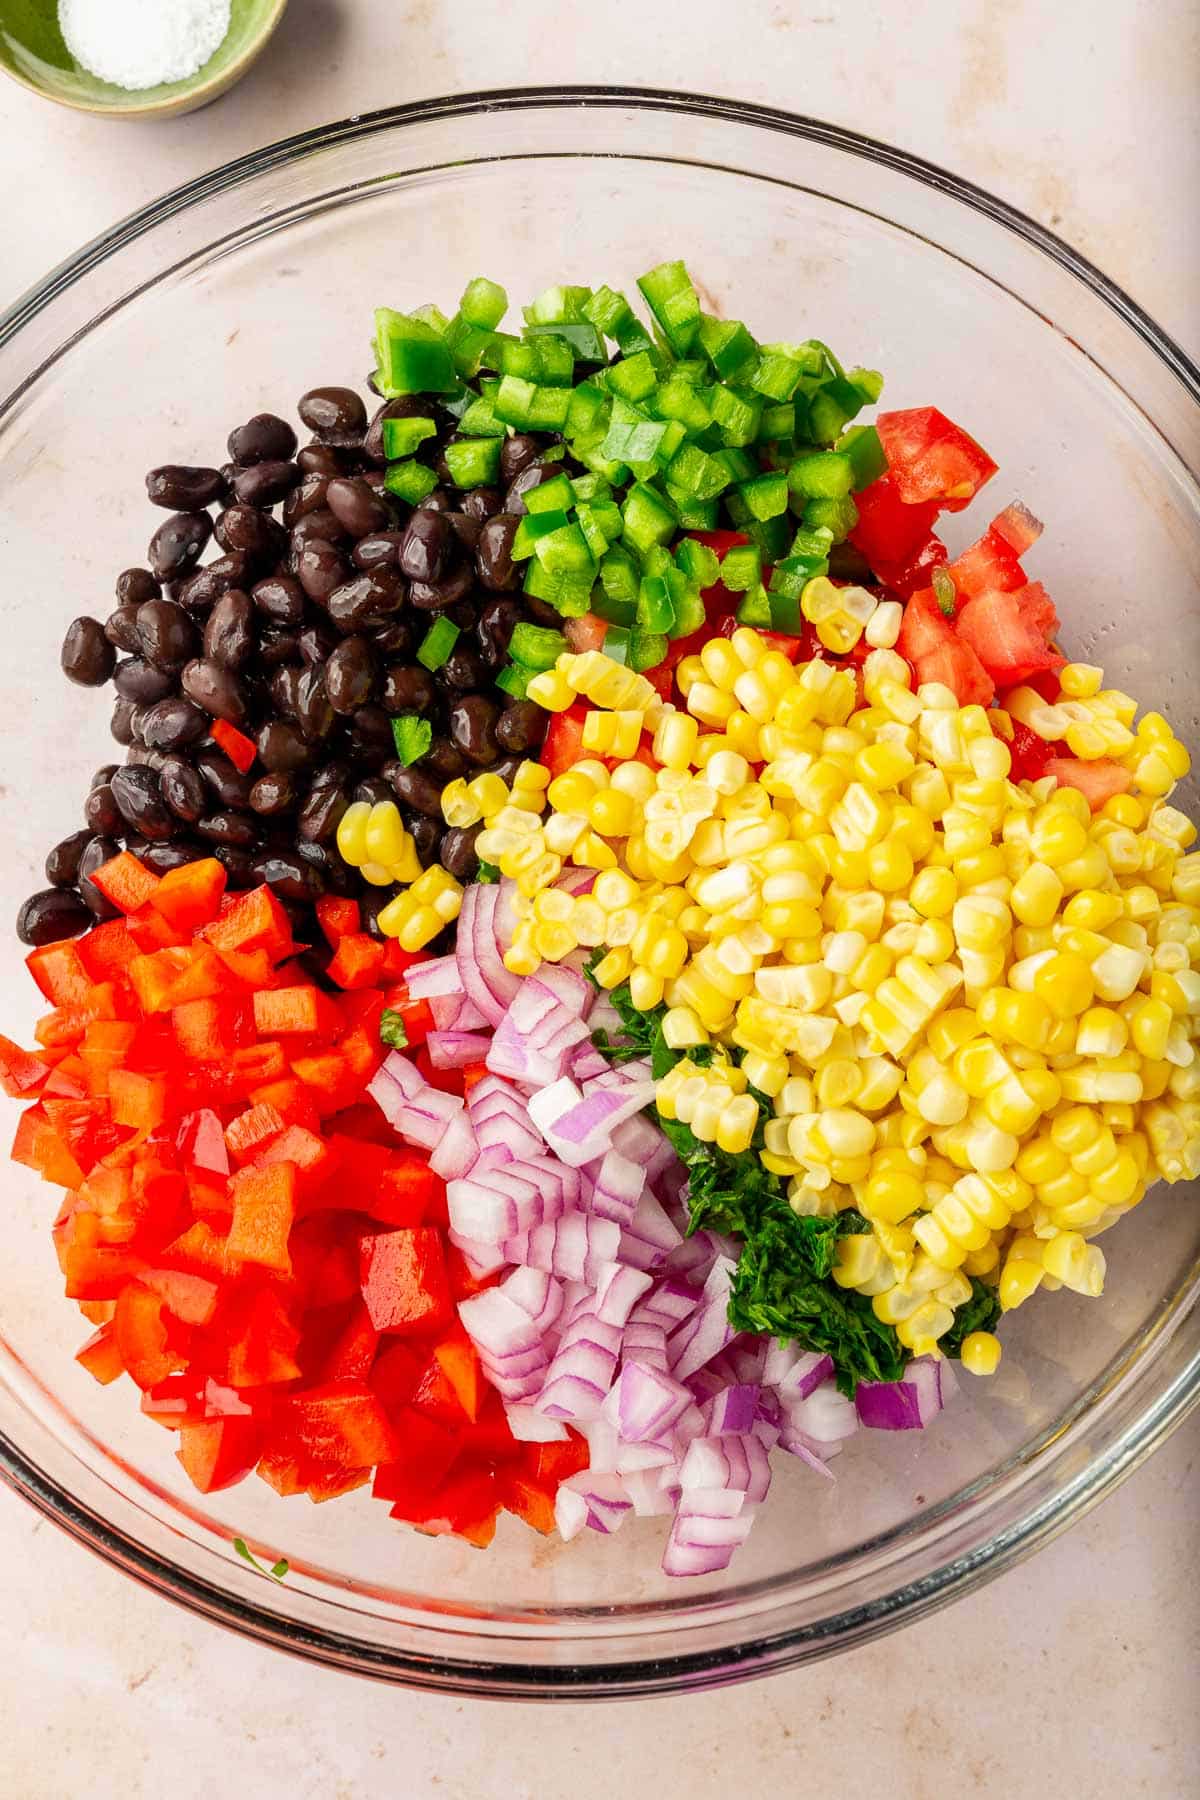 A glass mixing bowl with black beans, diced jalapeño, tomato, corn, cilantro, red onion and red bell pepper before mixing together.